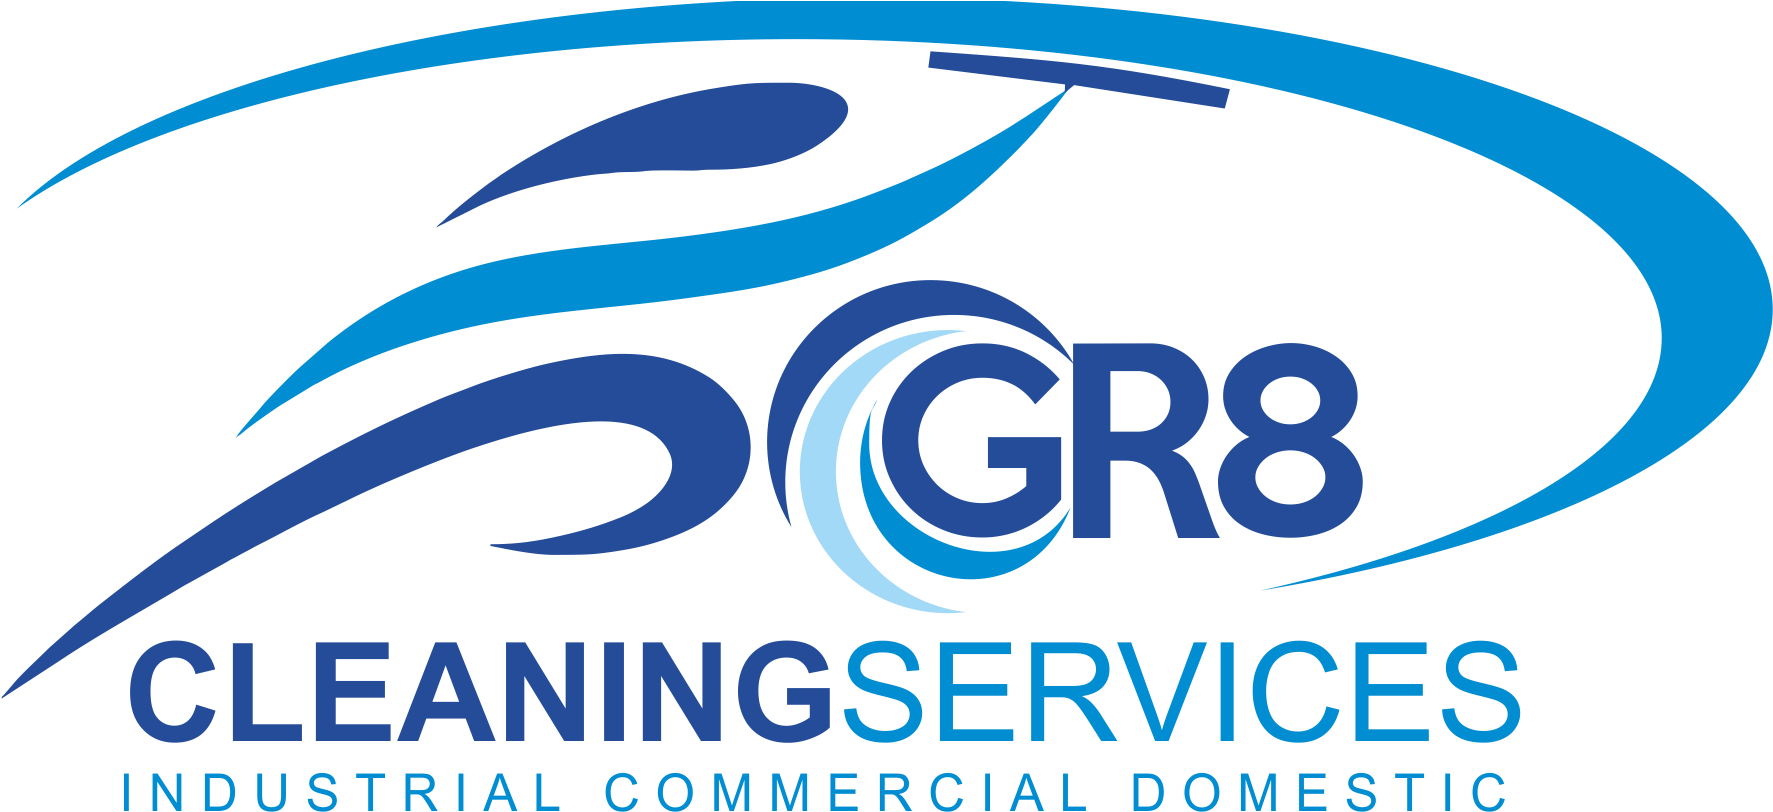 Names For Cleaning Services Companies - Cleaning Company Logos Uk (1772x894)